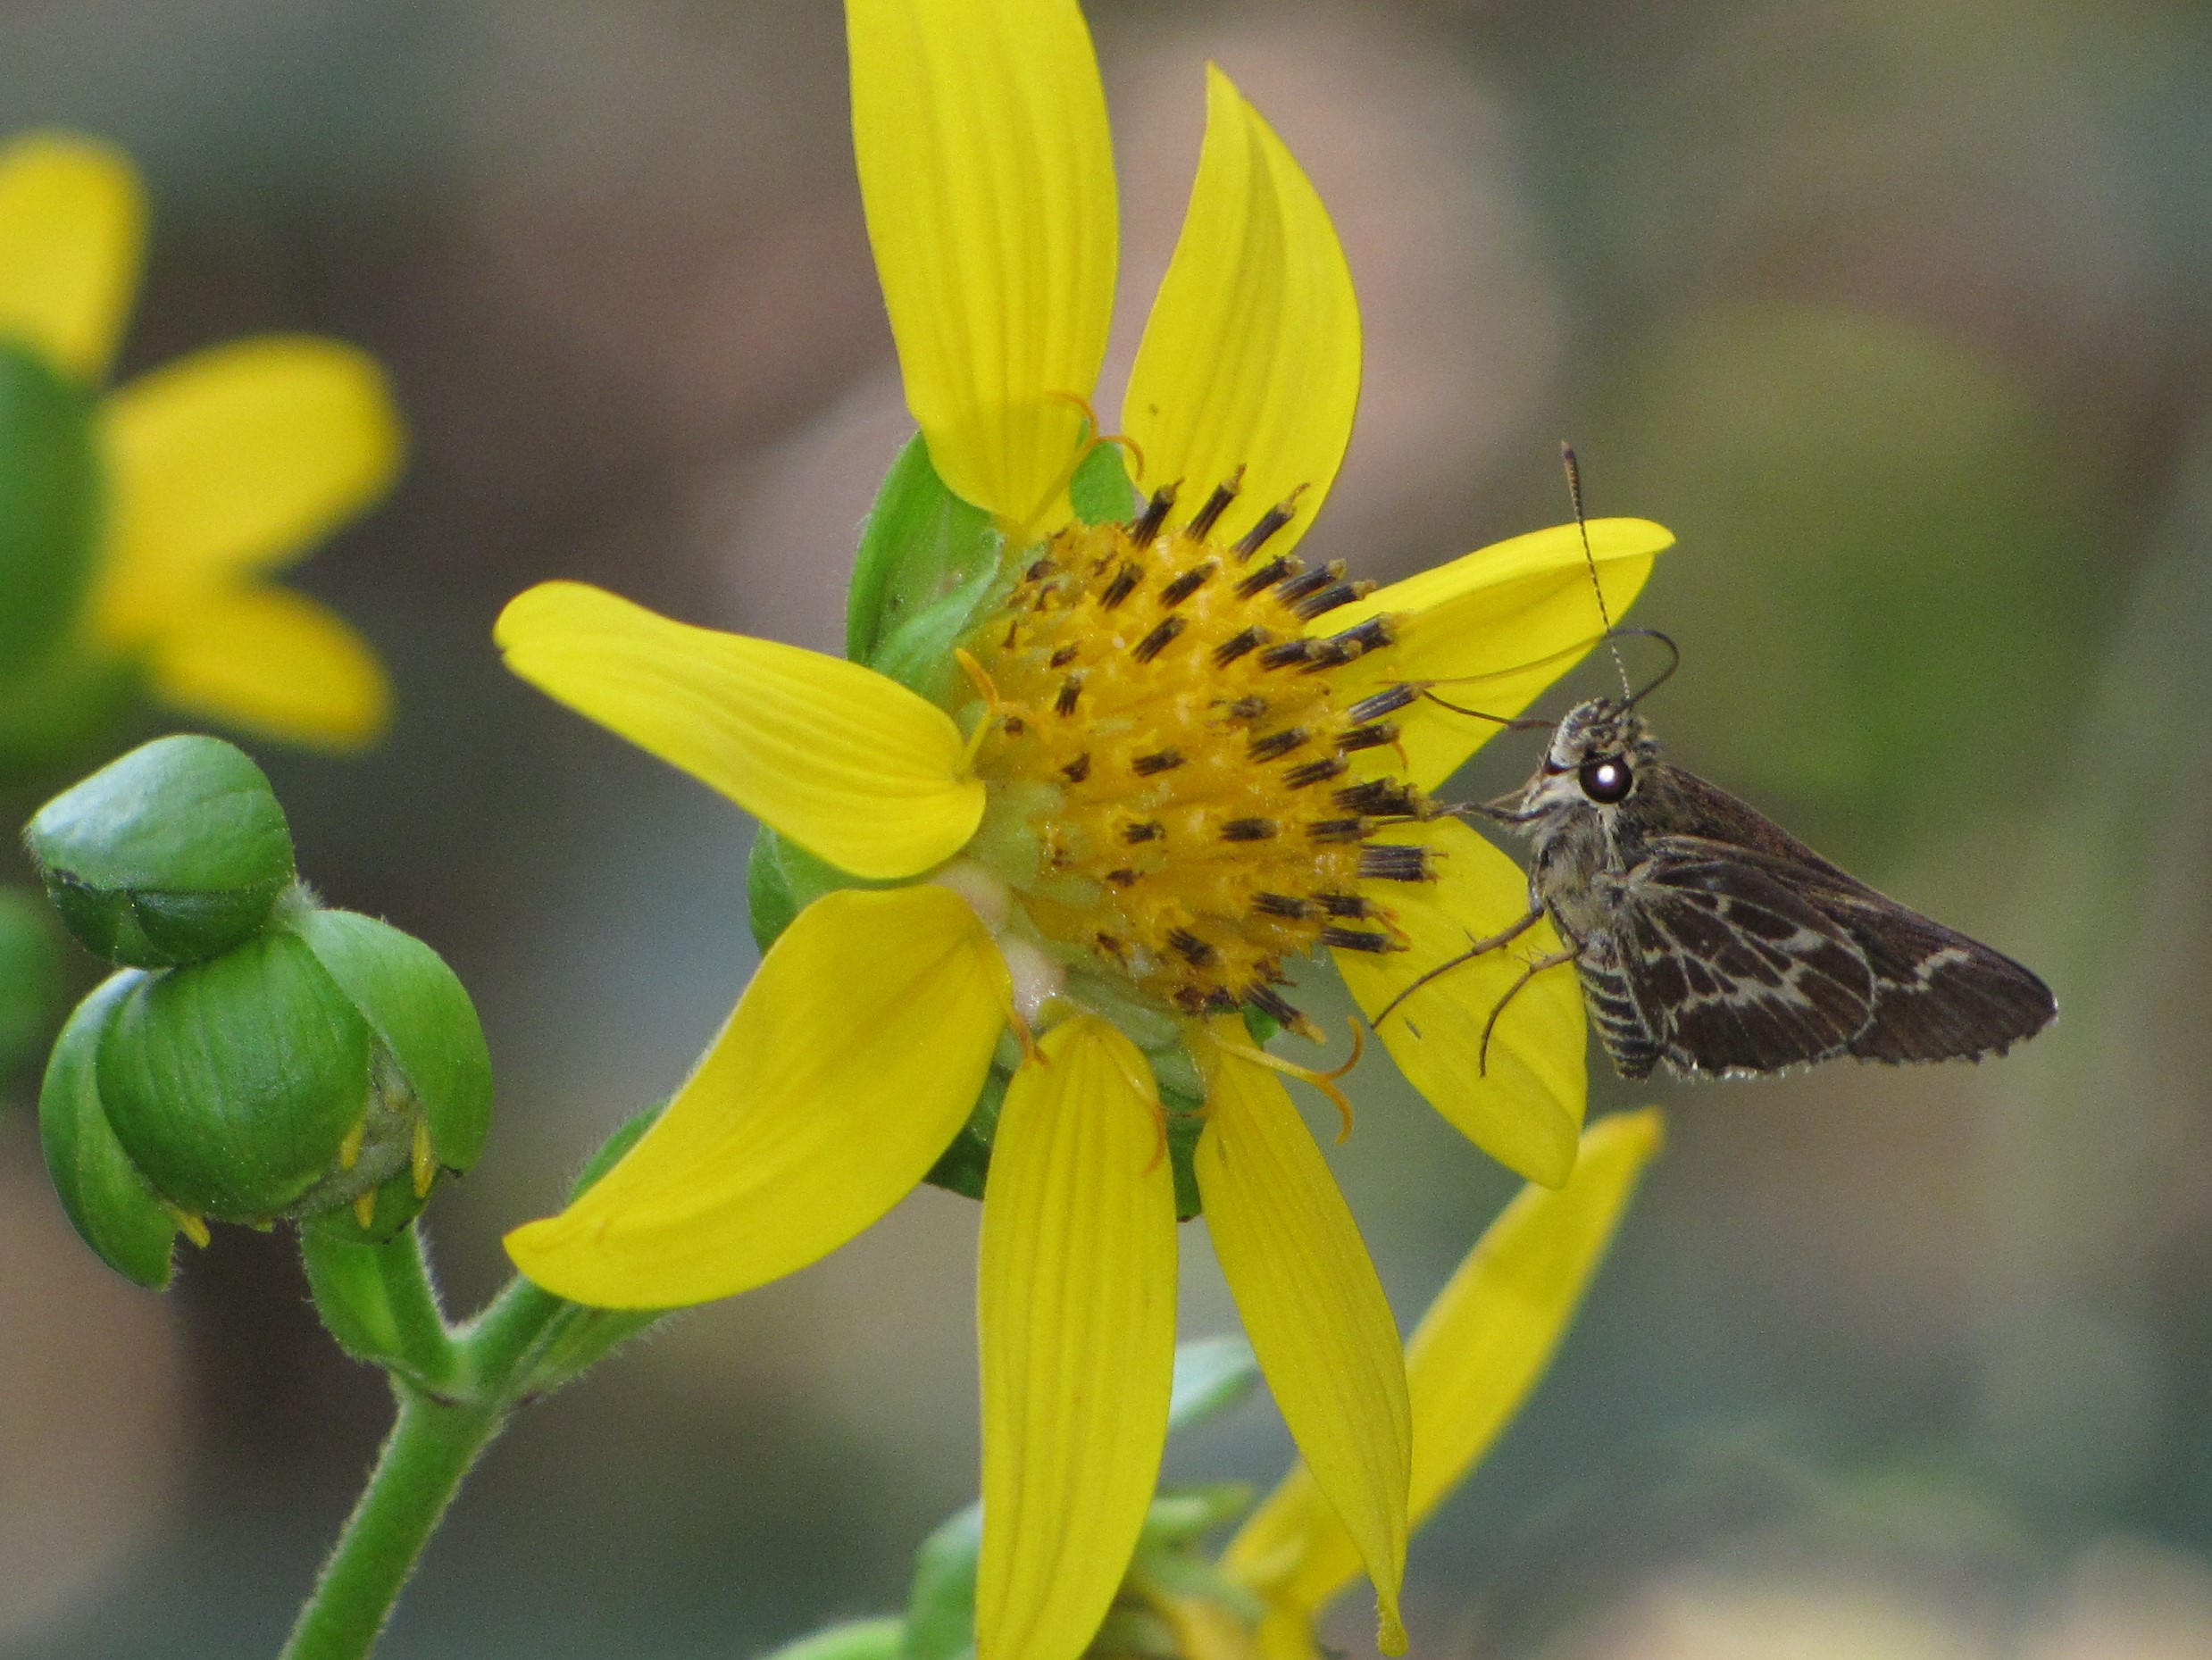 Lace-winged roadside skipper (Amblyscirtes aesculapius) at Paynes Prairie Preserve State Park.